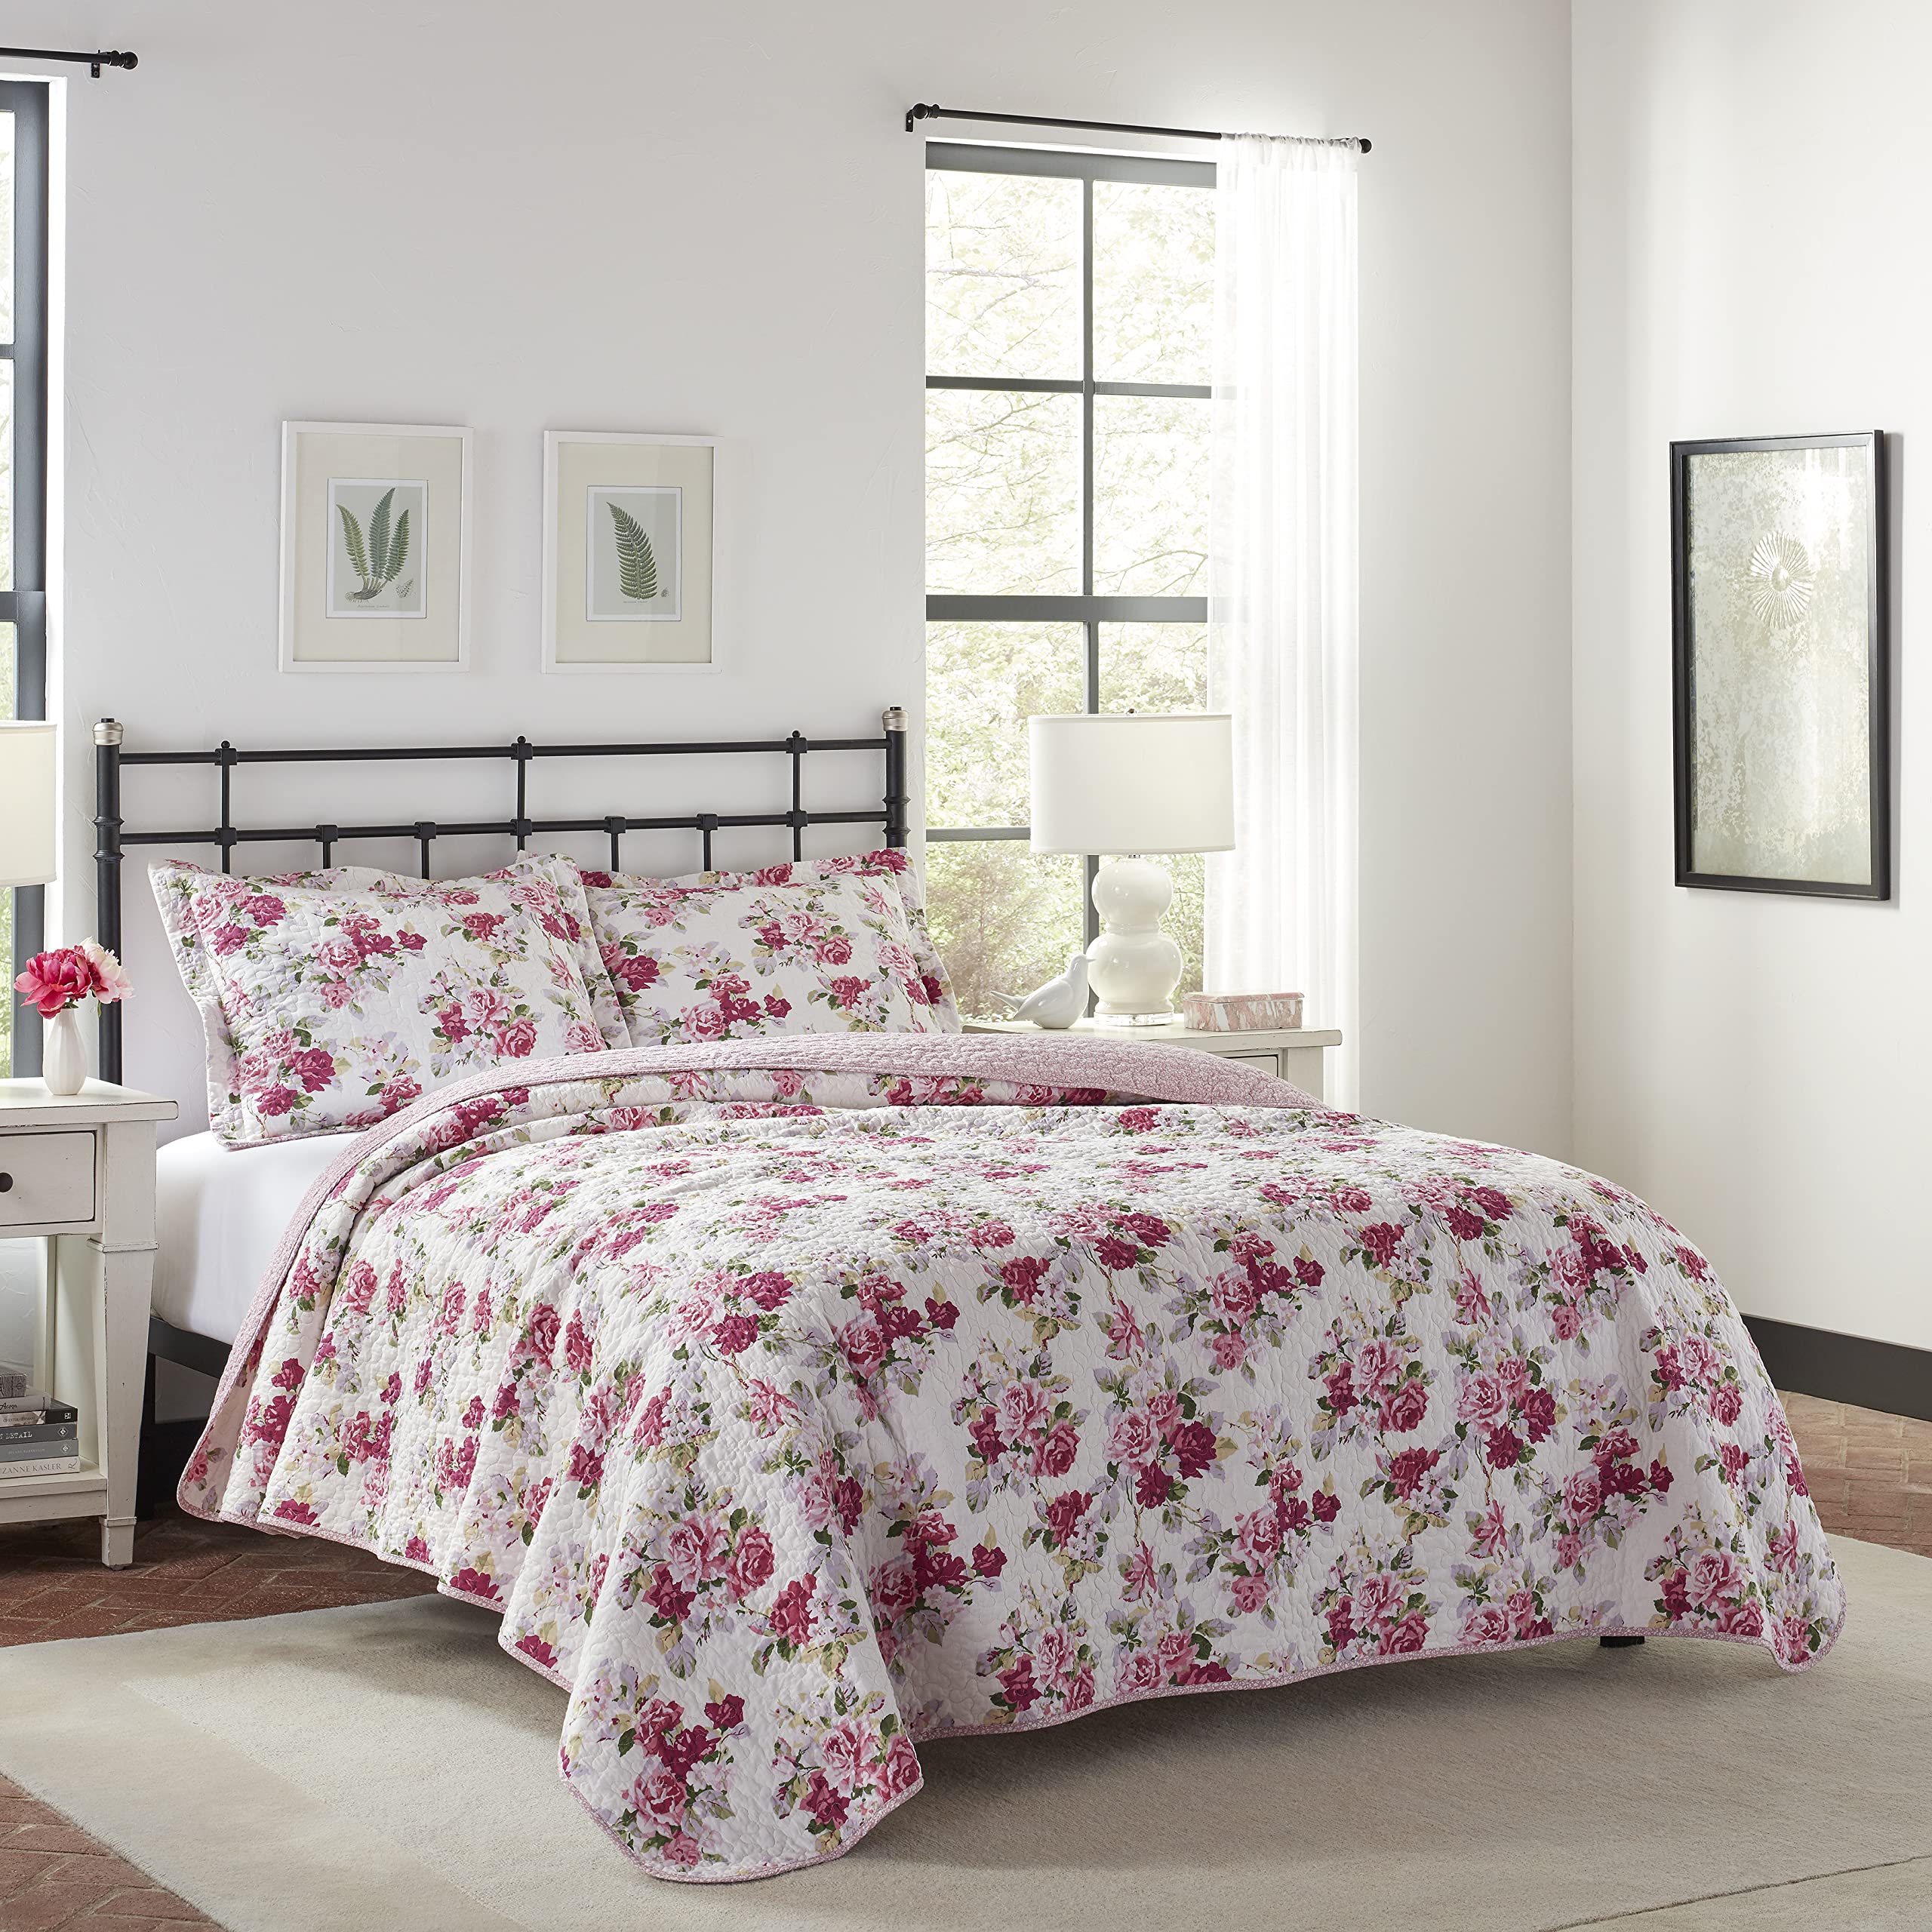 Book Cover Laura Ashley Home Lidia Collection Quilt Set-100% Cotton, Reversible, Lightweight & Breathable Bedding, Pre-Washed for Added Softness, Queen, Pink